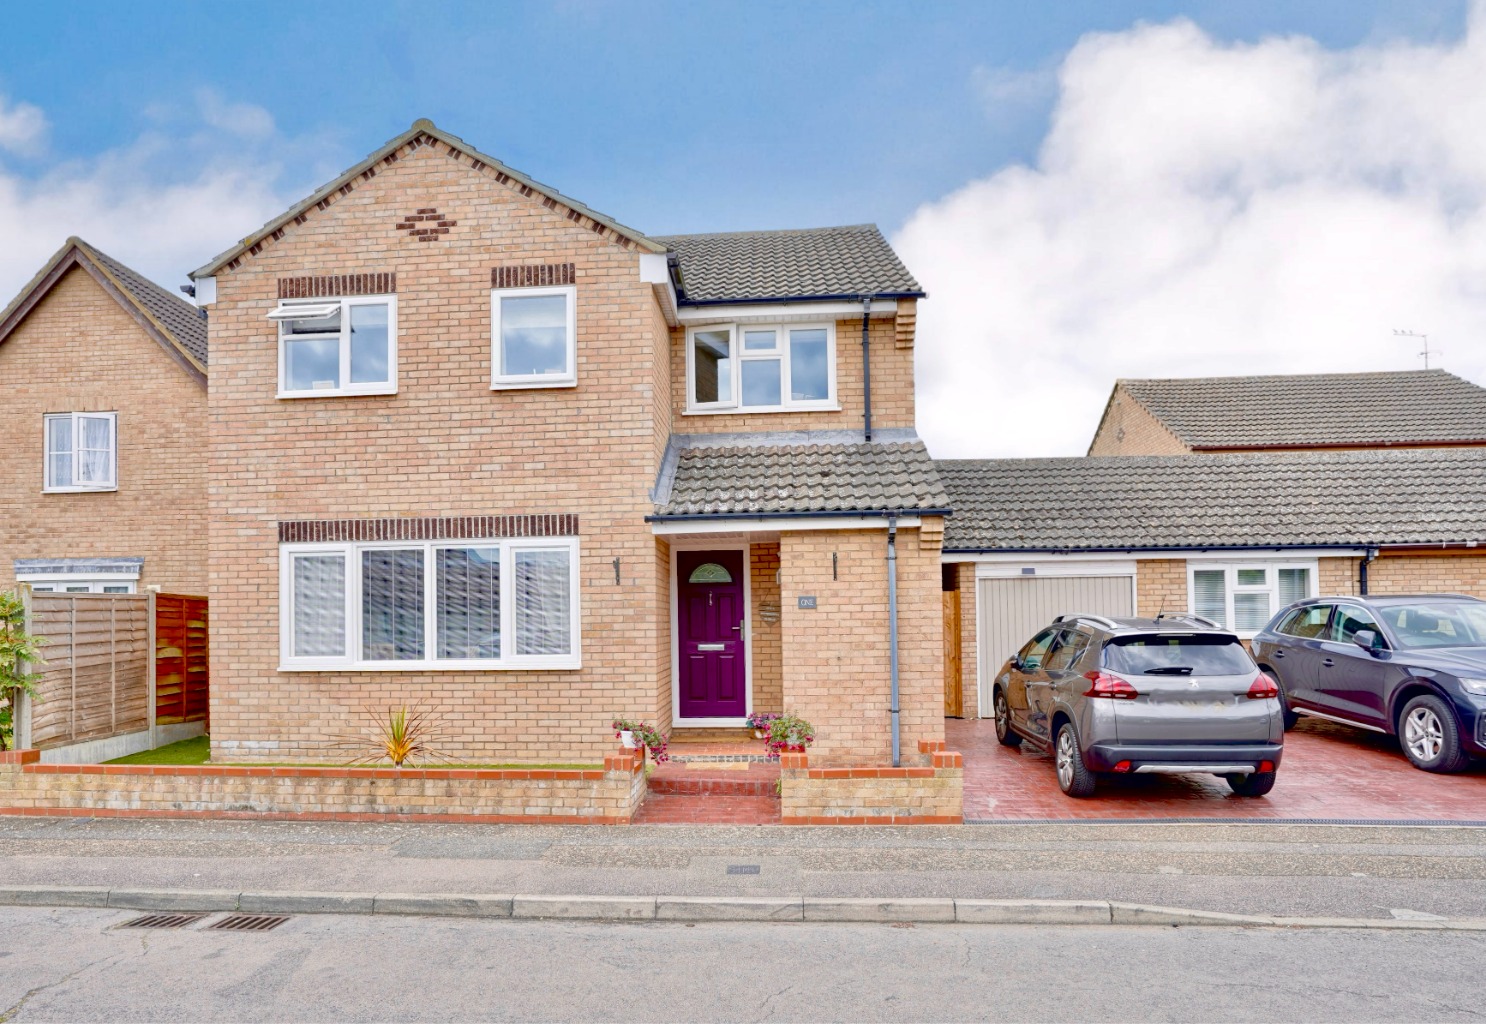 4 bed detached house for sale in Crane Street, Huntingdon  - Property Image 1